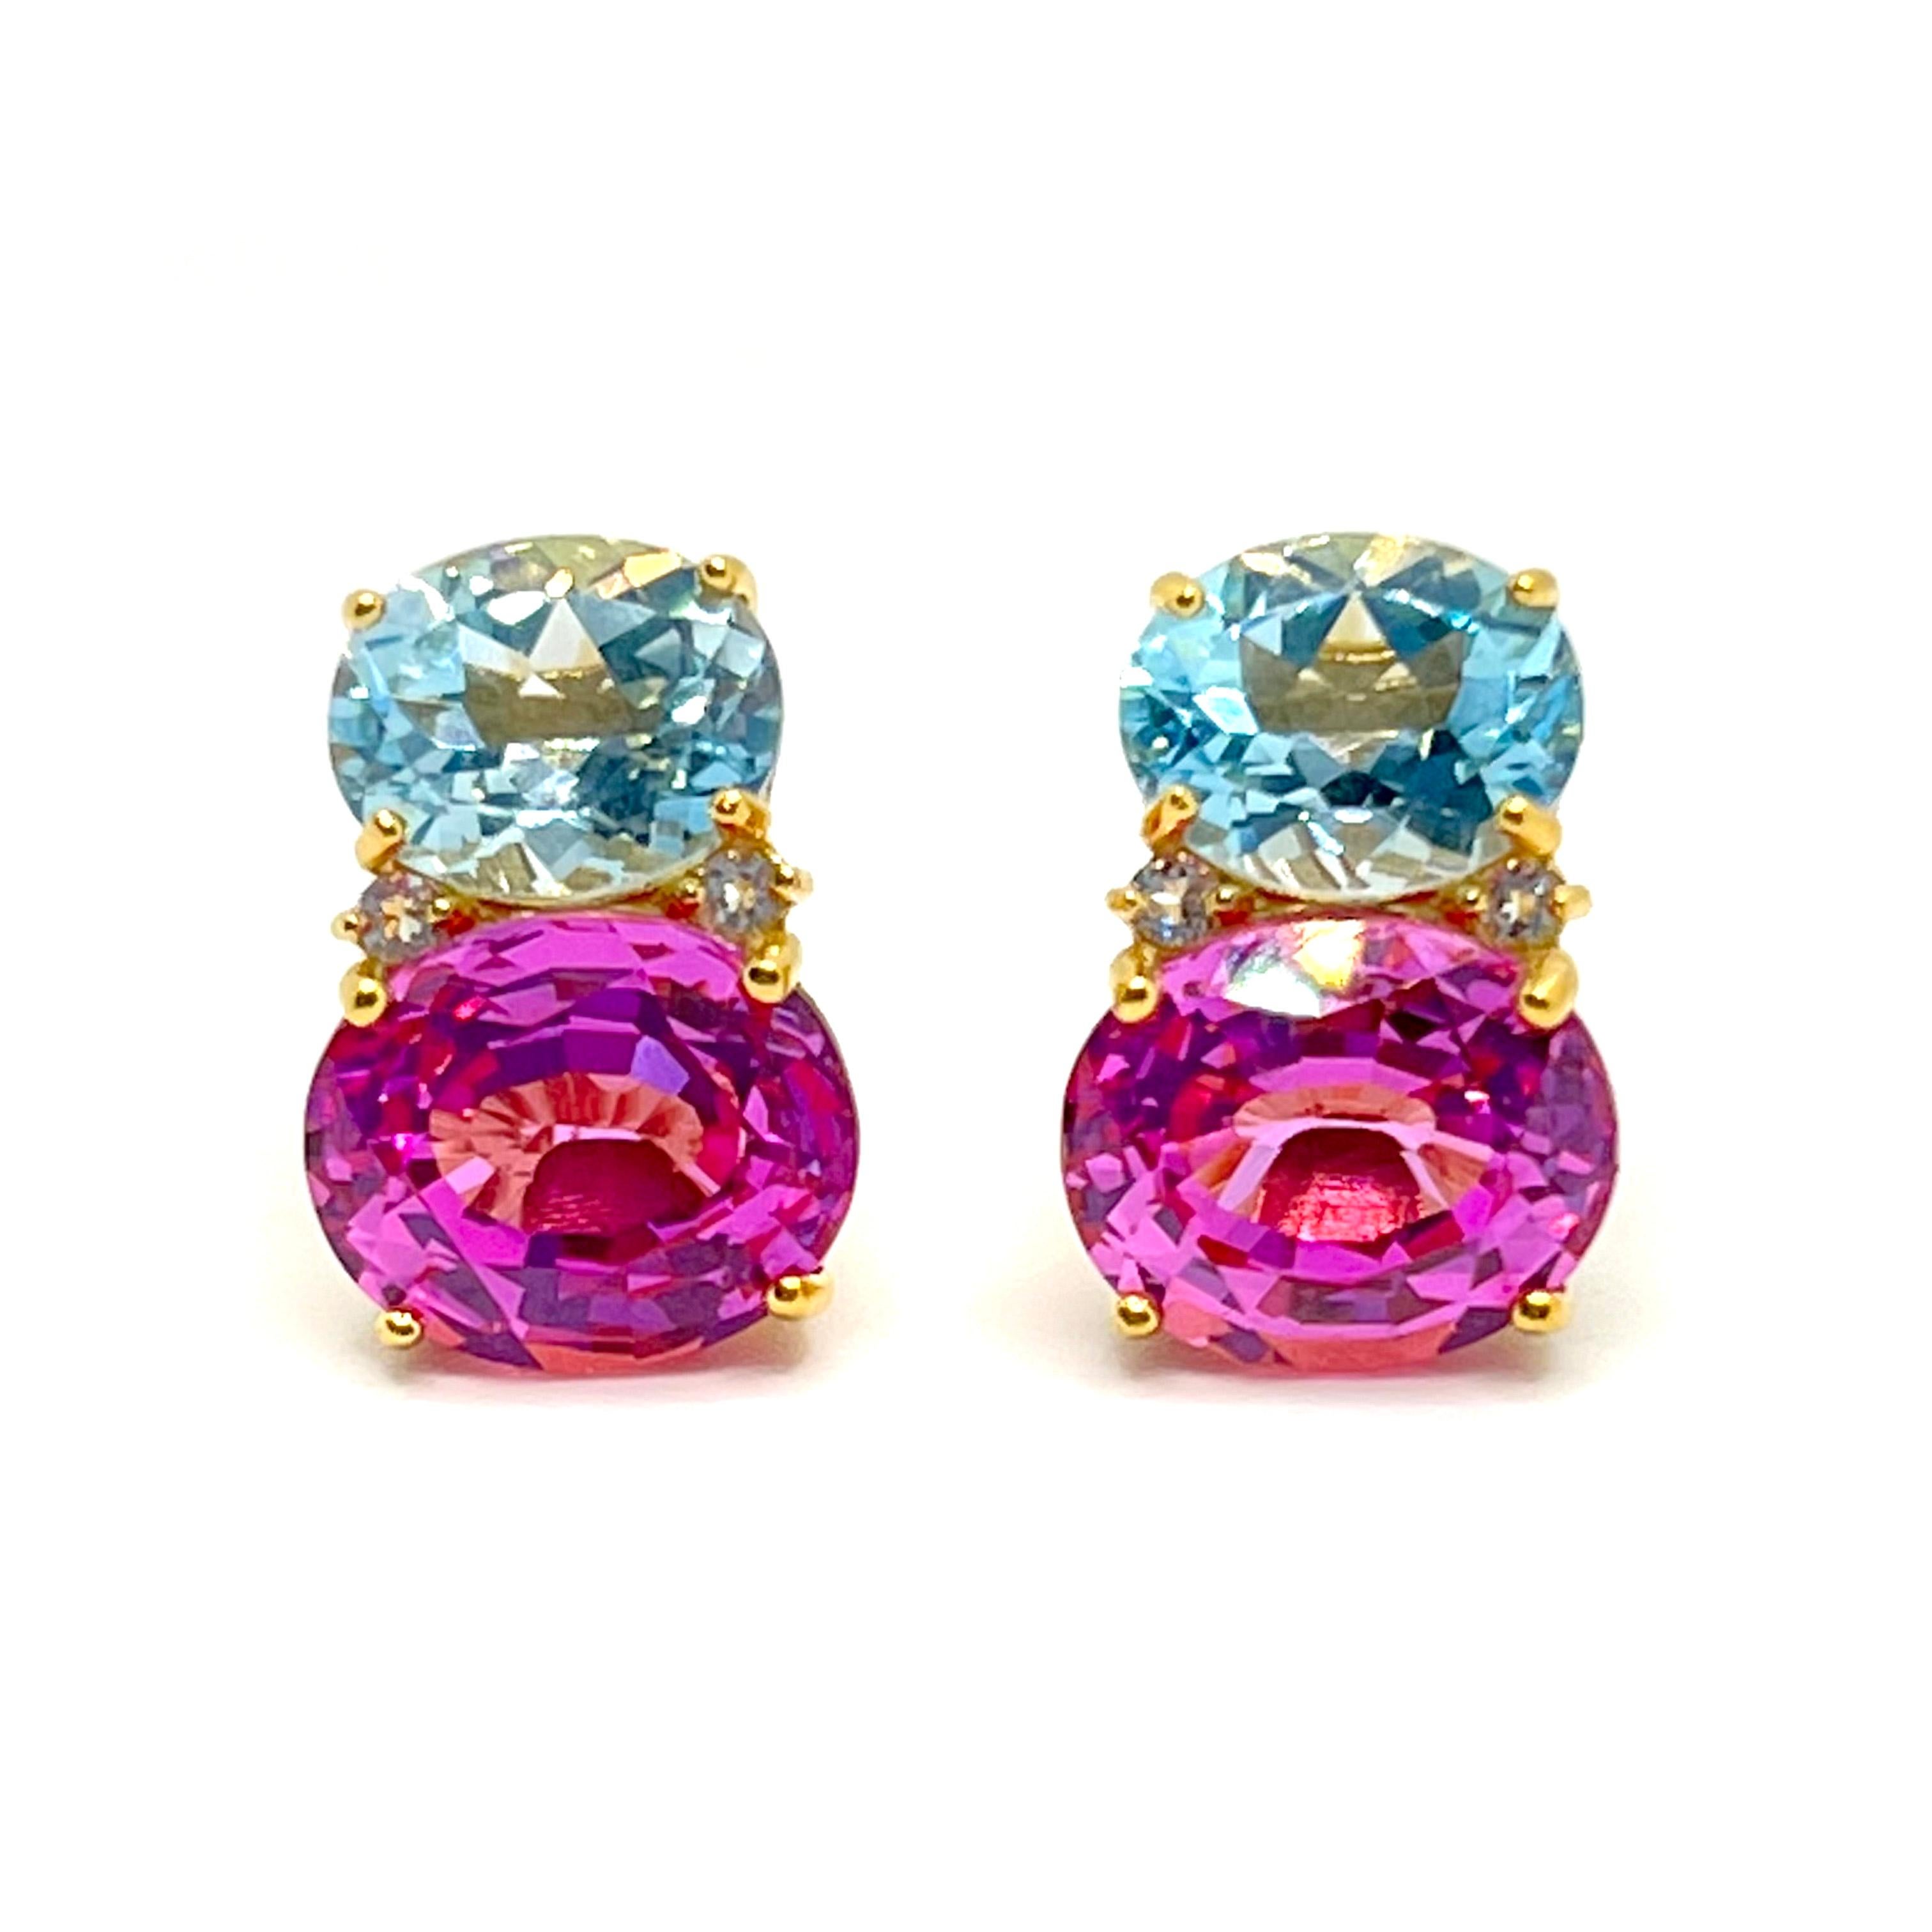 These stunning pair of earrings features a pair of oval sky blue topaz, lab-grown pink sapphire, adorned with round white topaz on the side, handset in 18k yellow gold vermeil over sterling silver. The two-tone blue combination just look so great